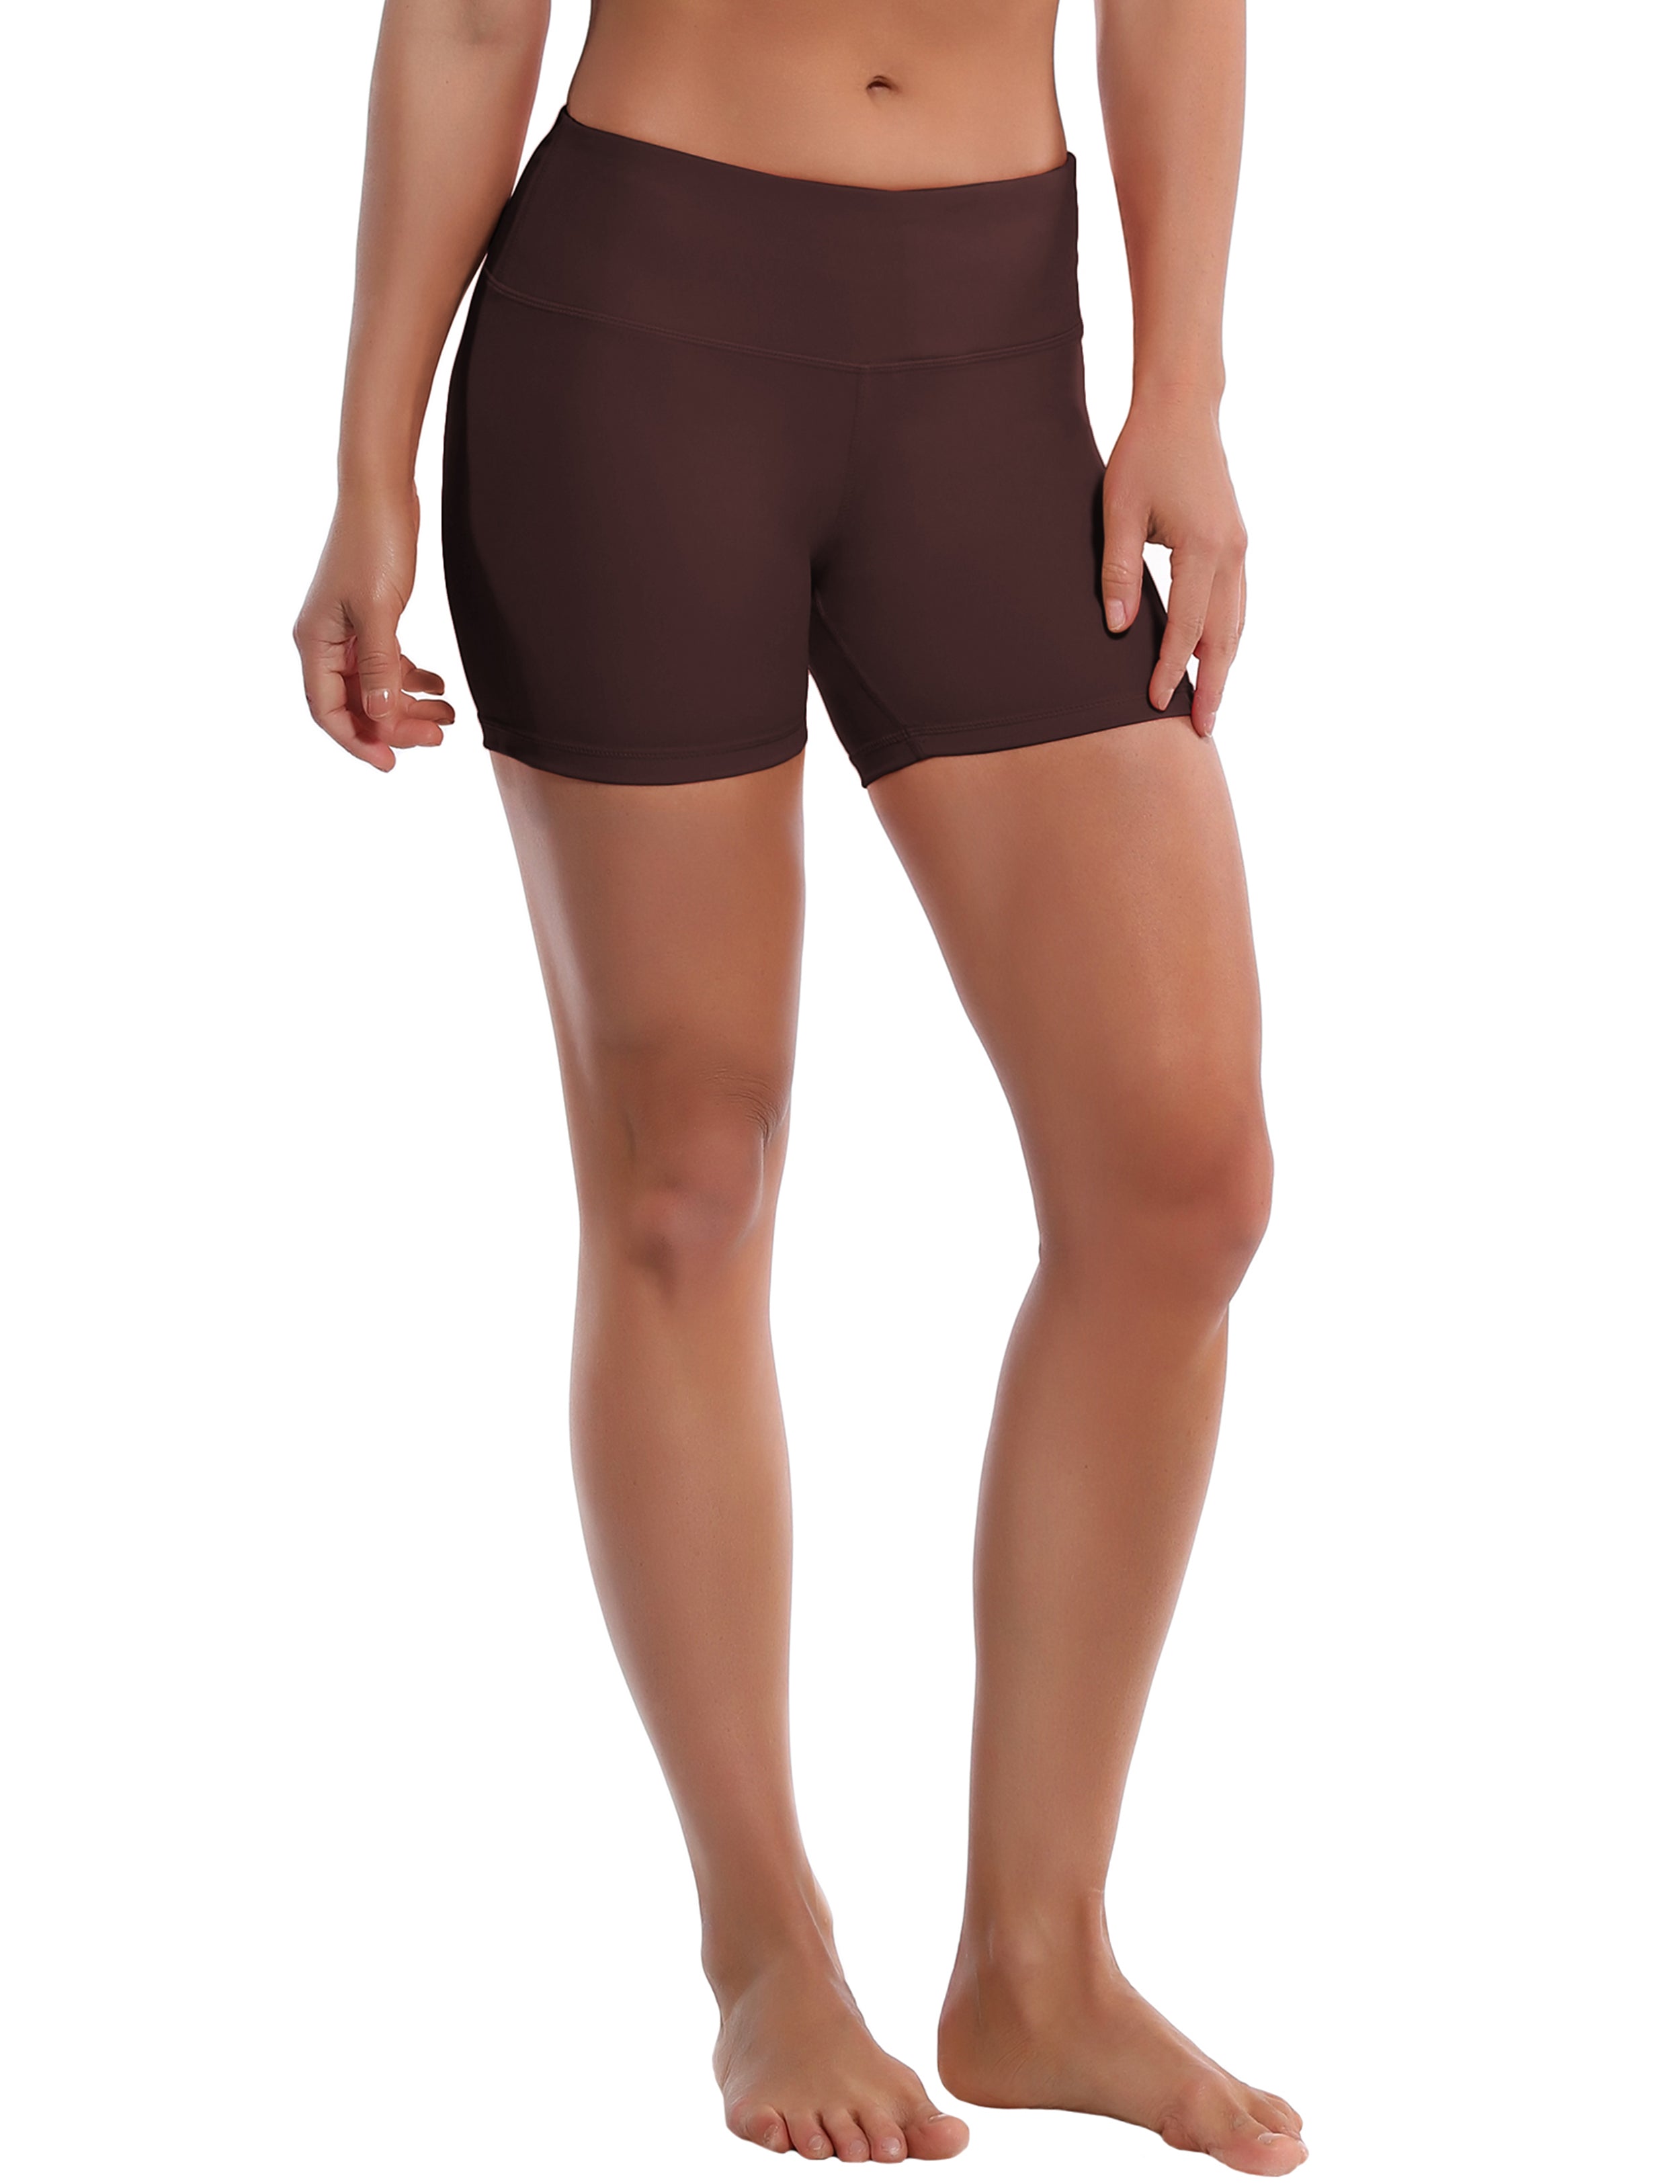 4" Golf Shorts mahoganymaroon Sleek, soft, smooth and totally comfortable: our newest style is here. Softest-ever fabric High elasticity High density 4-way stretch Fabric doesn't attract lint easily No see-through Moisture-wicking Machine wash 75% Nylon, 25% Spandex